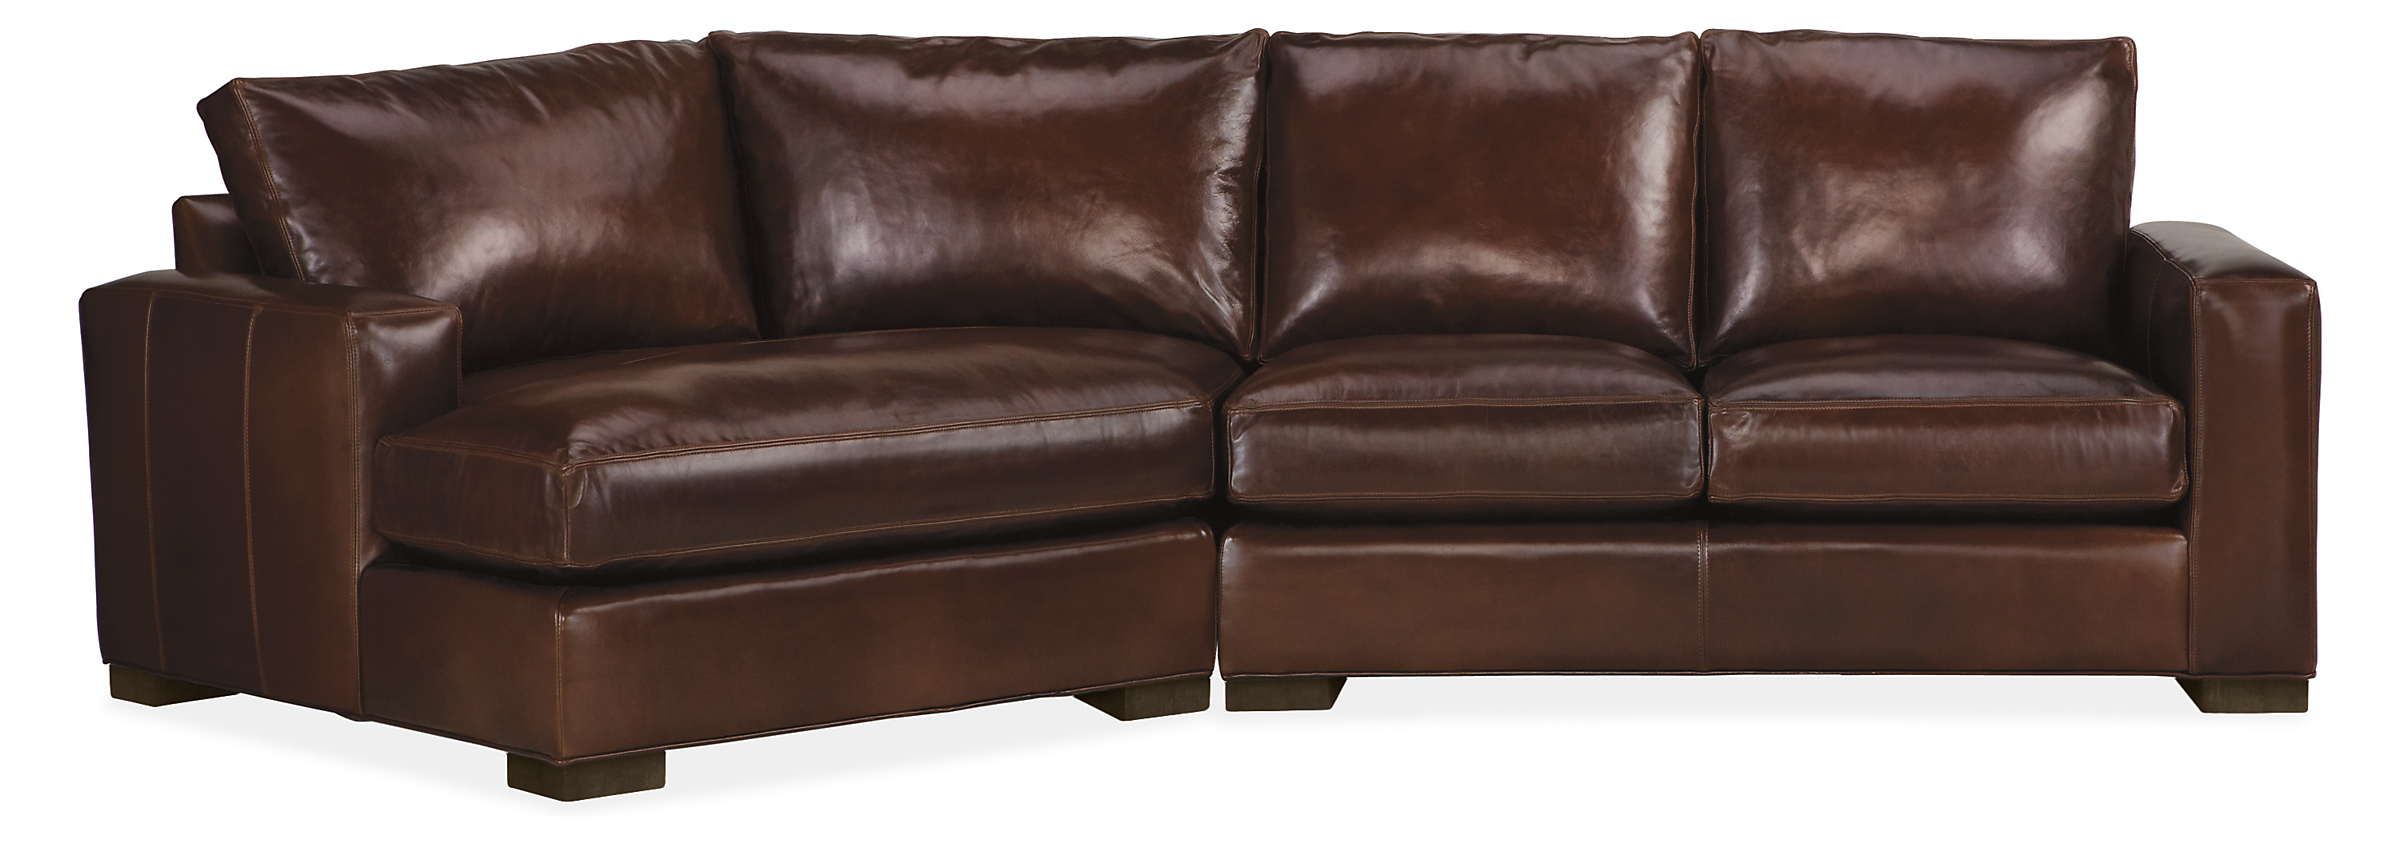 Metro 121" Sofa with Left-Arm Angled Chaise